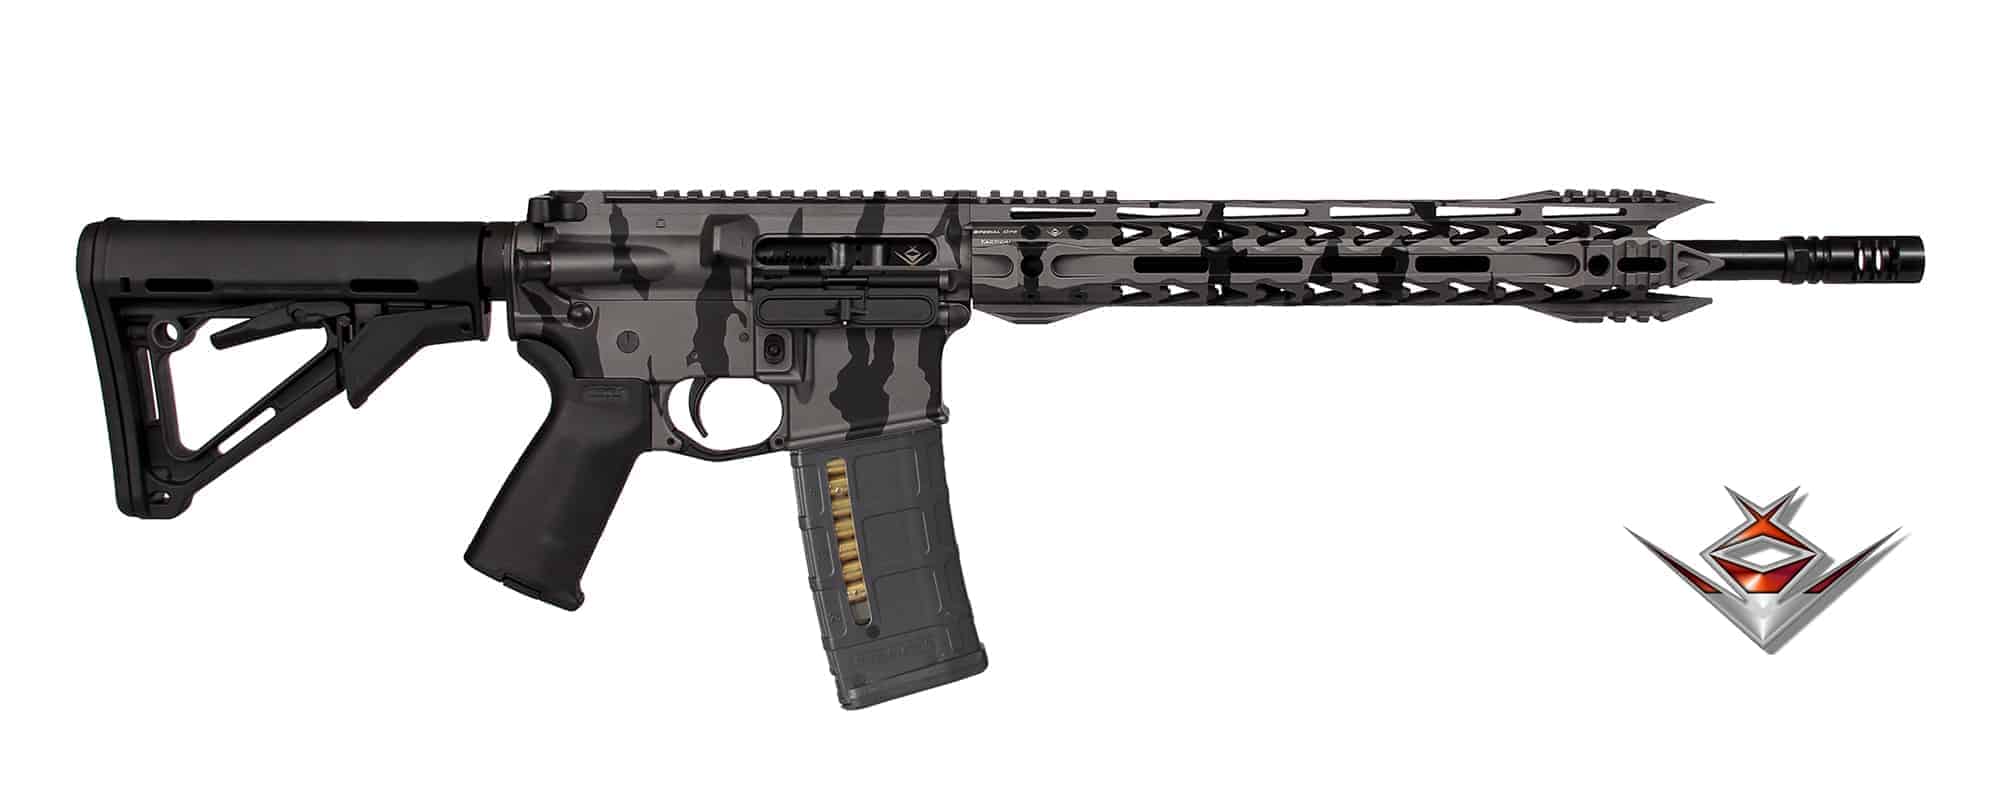 16" 300 BLK-OUT Tiger Rifle W/ Javelin 12" Rail